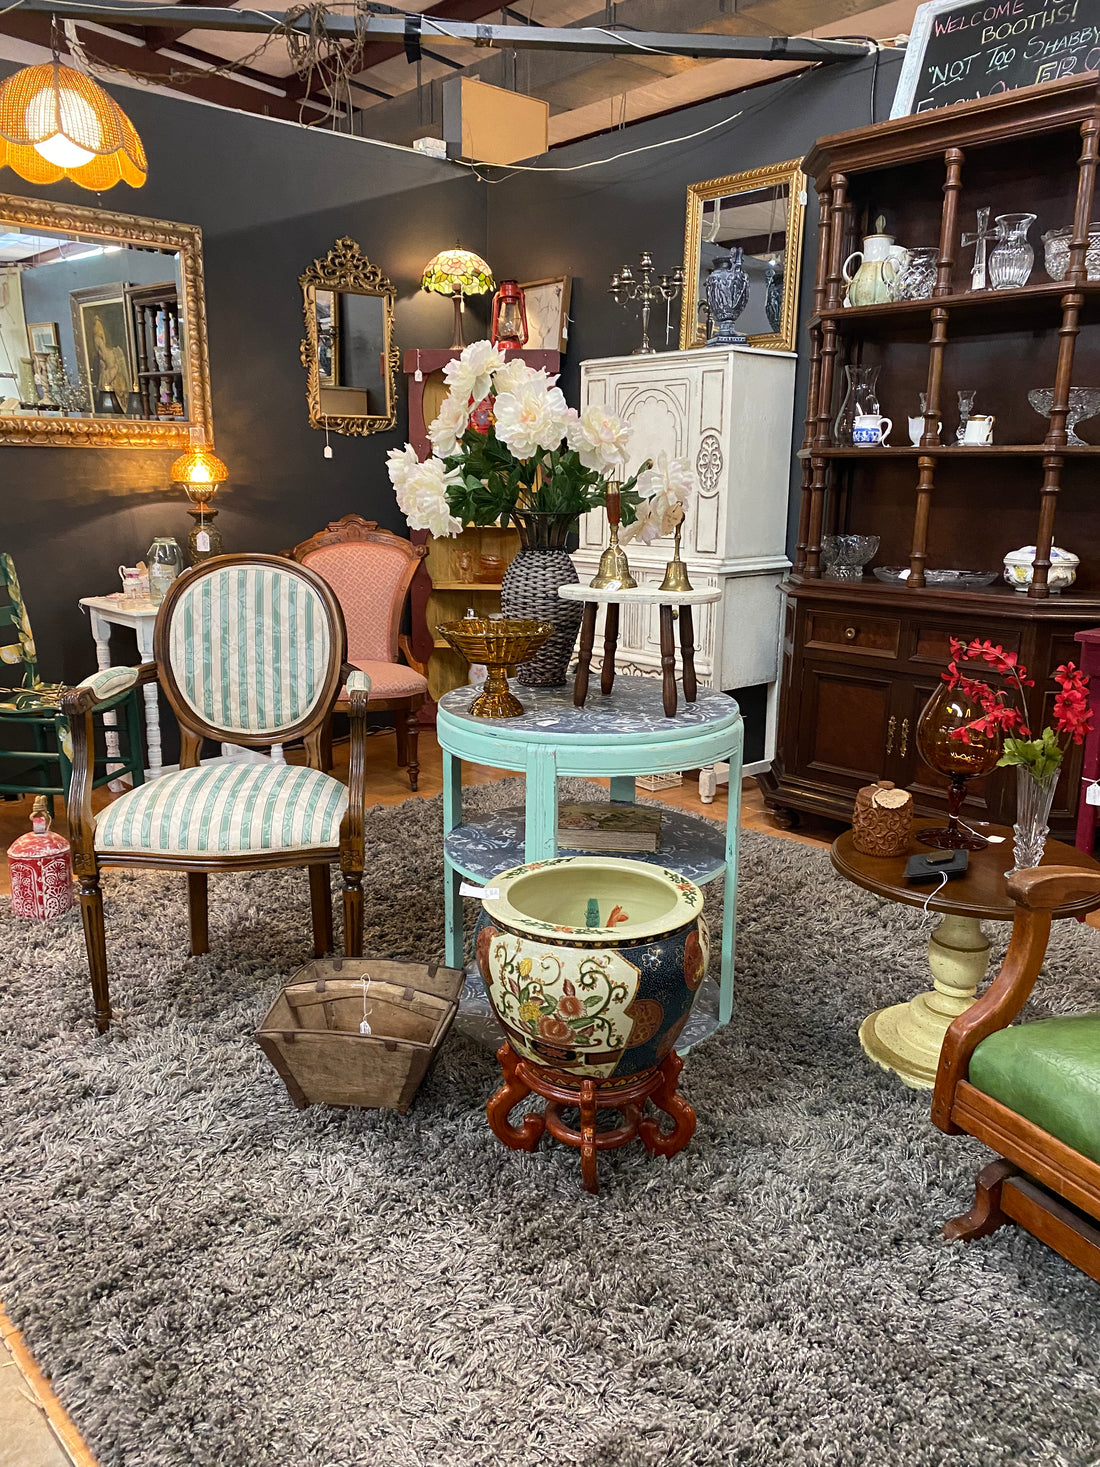 How to Price Right in Your Antique Booth